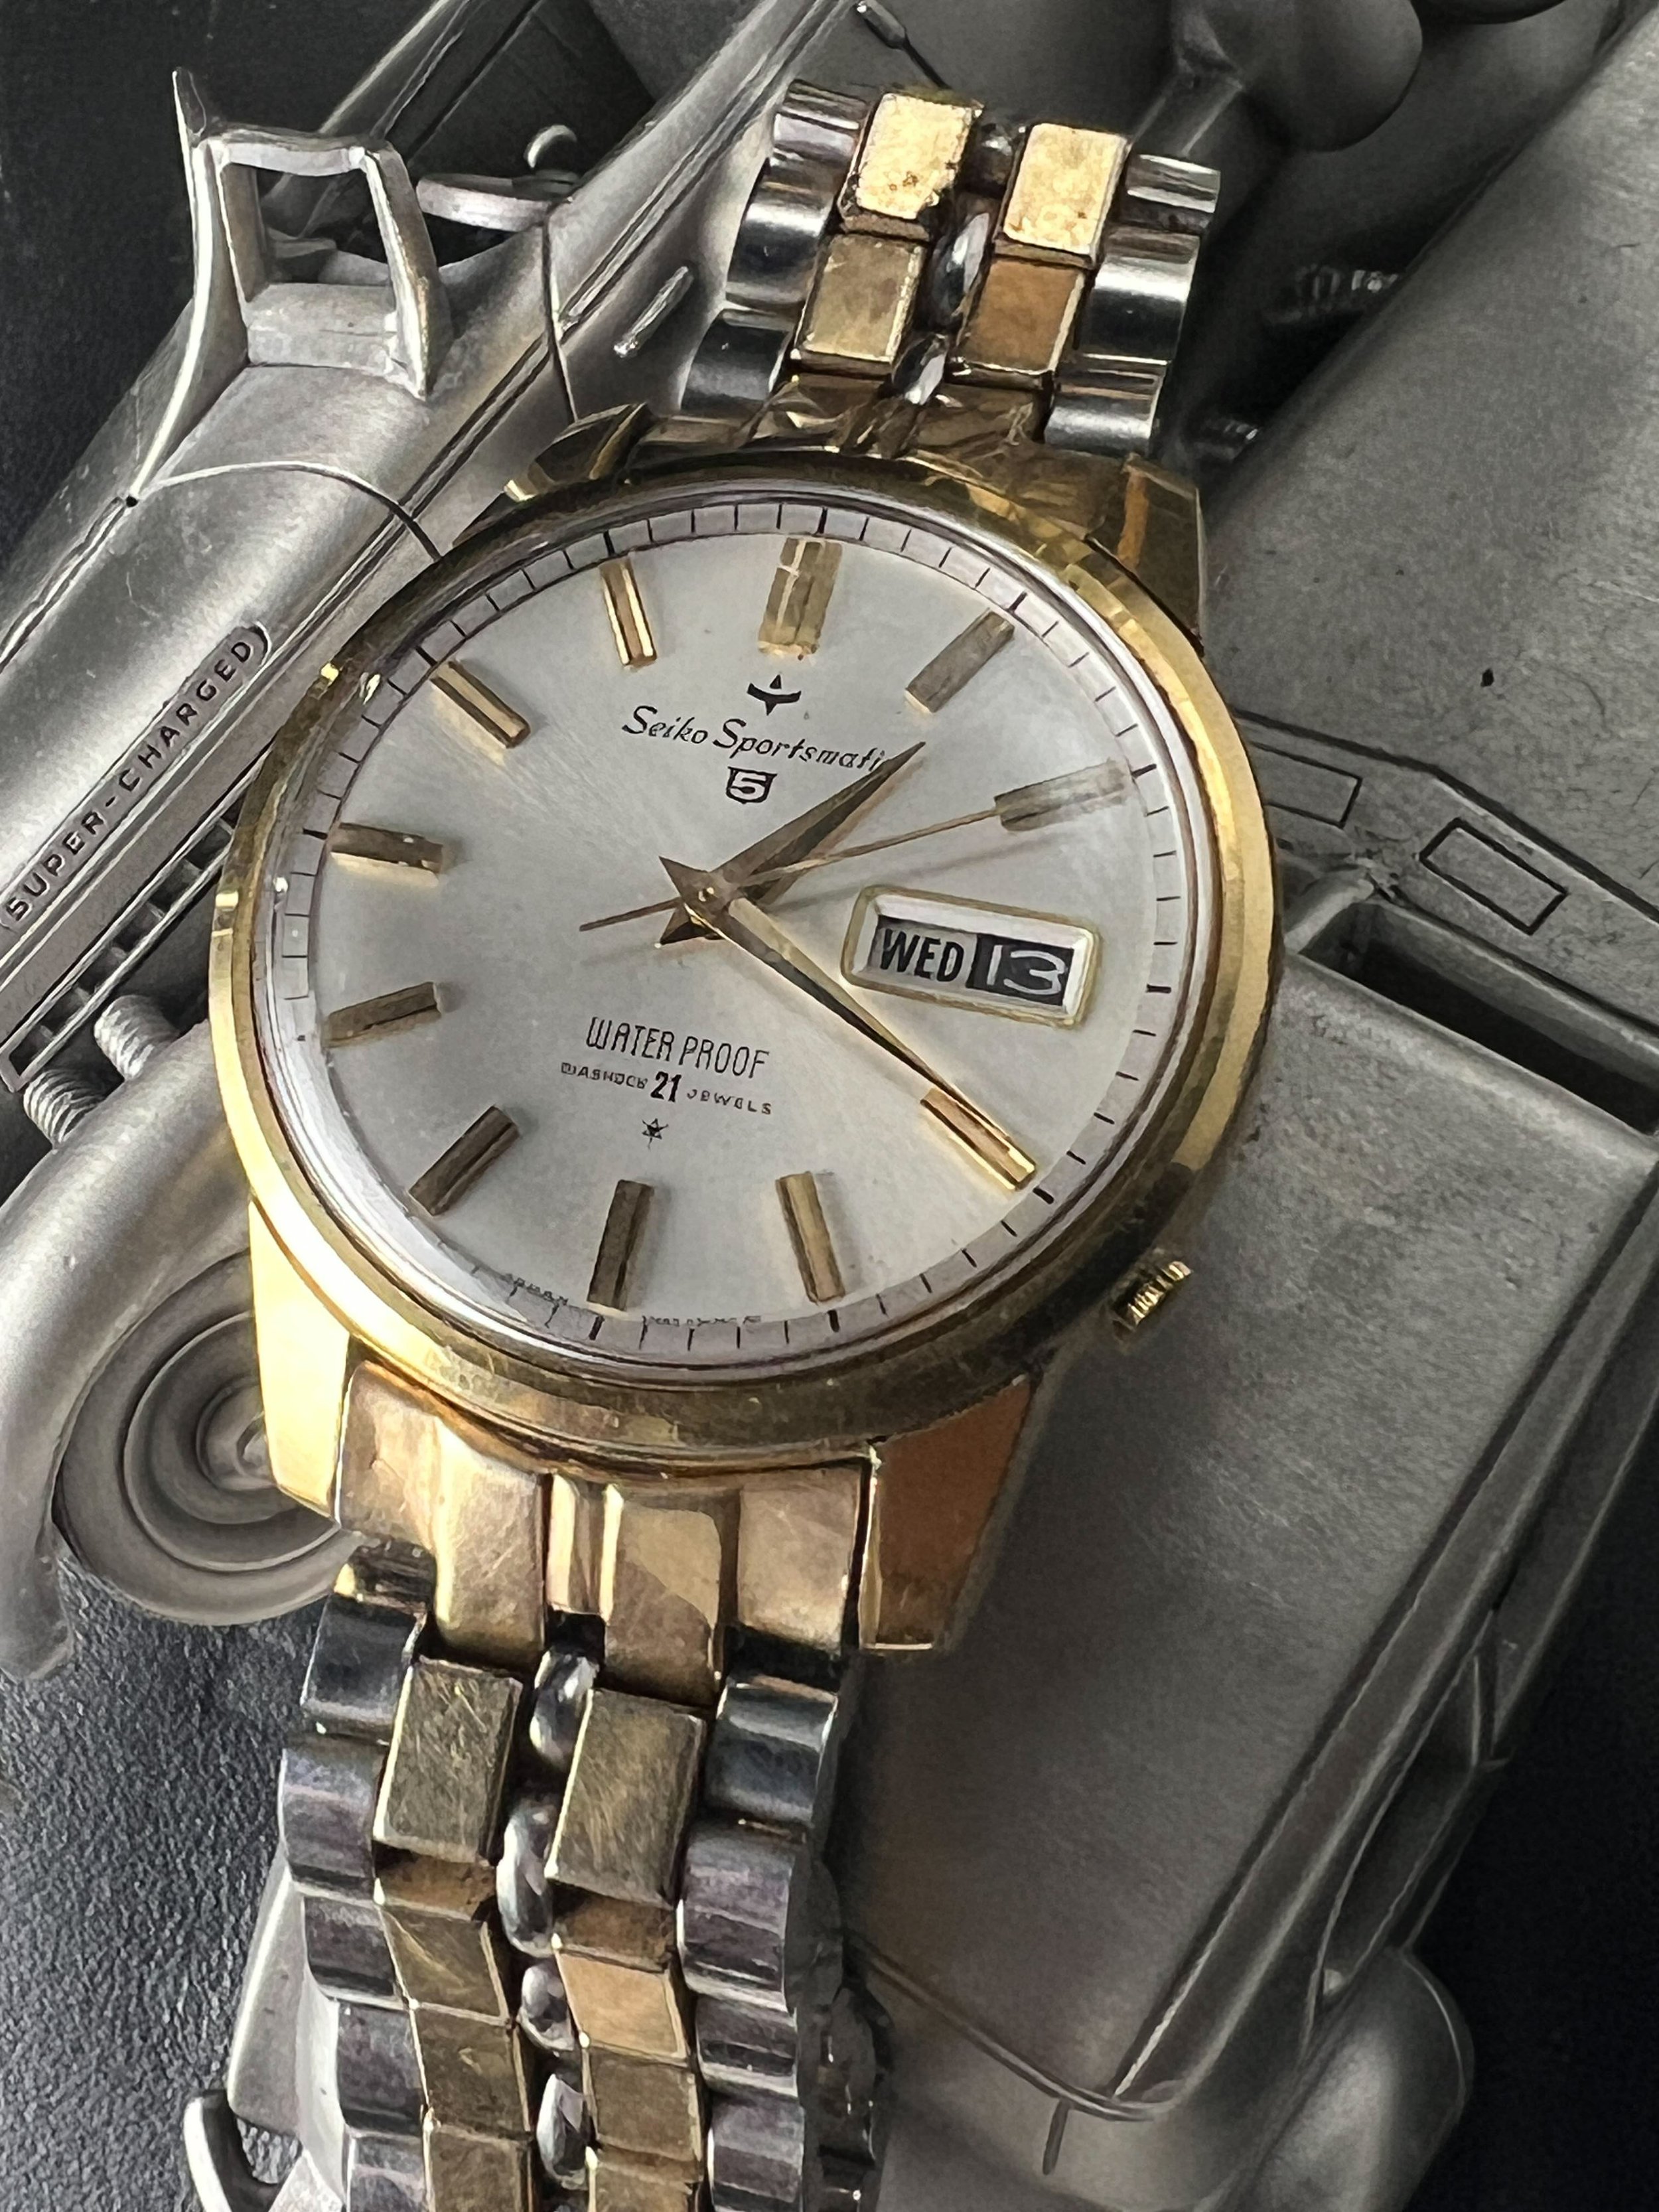 60's Seiko Sportsmatic 5 — Cool Vintage Watches